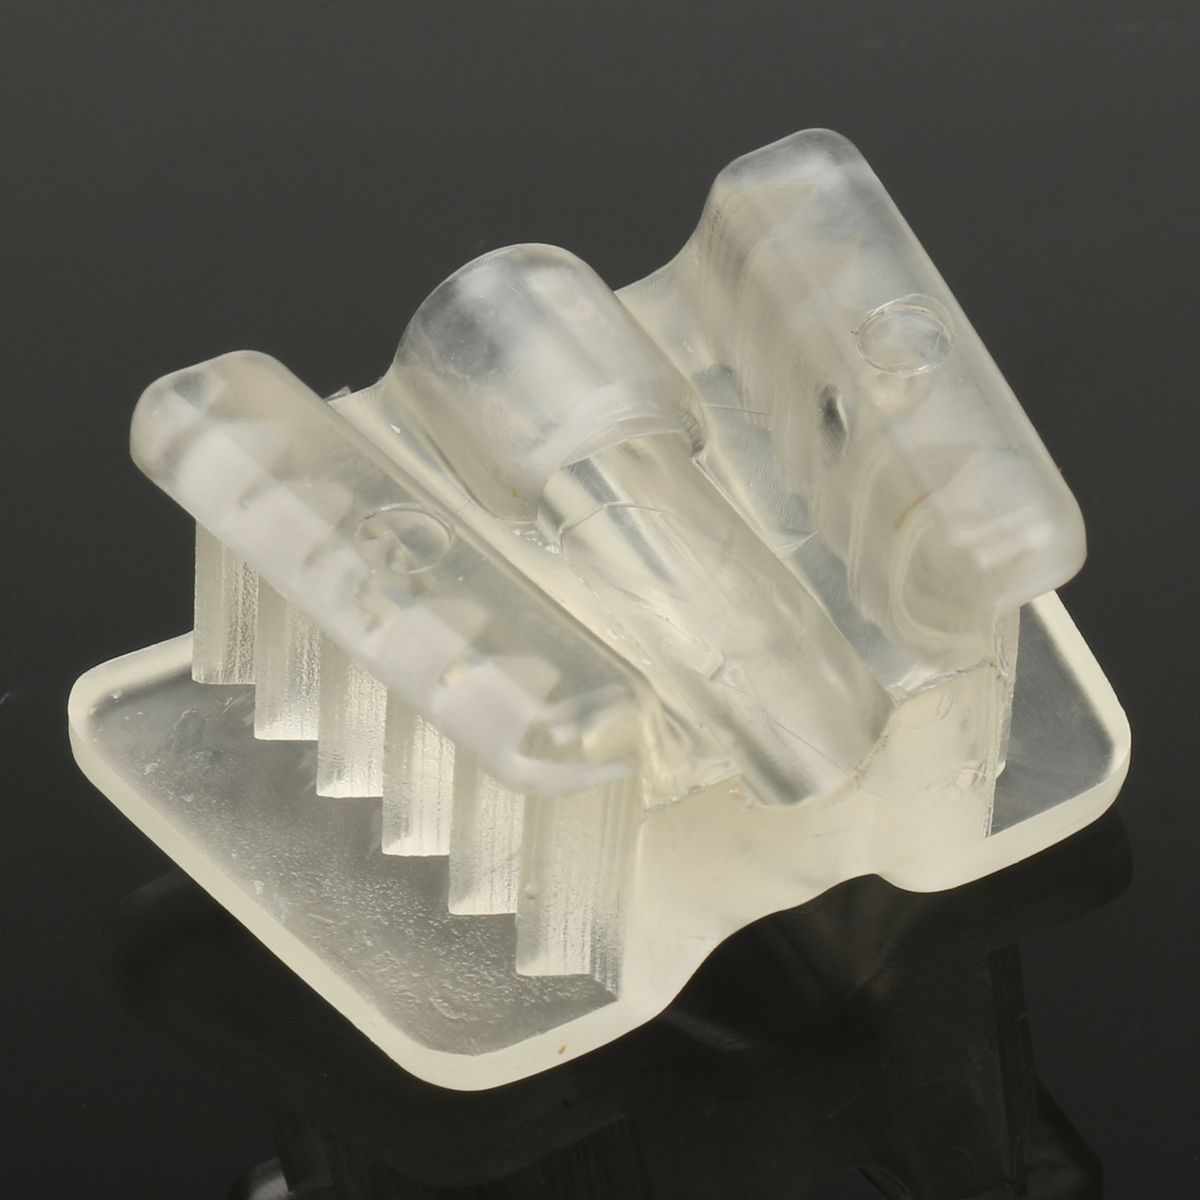 5pcs-Dental-Silicone-Mouth-Prop-Support-Holding-Saliva-Ejector-Suction-Hole-Tip-Tools-1637651